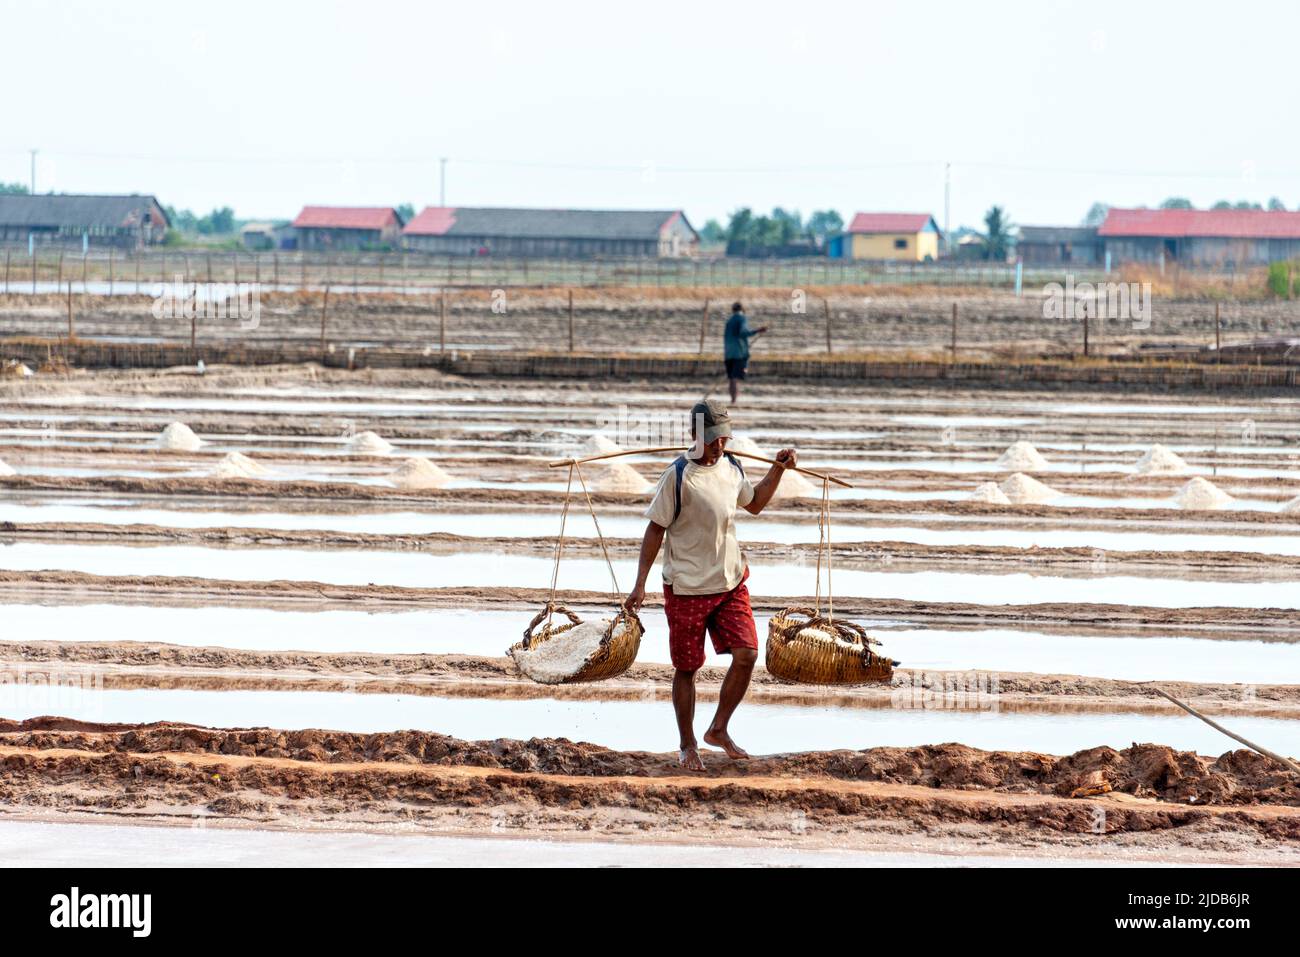 A man carries baskets of rice along the rows in a farming community in Southern Cambodia; Kampot, Cambodia Stock Photo